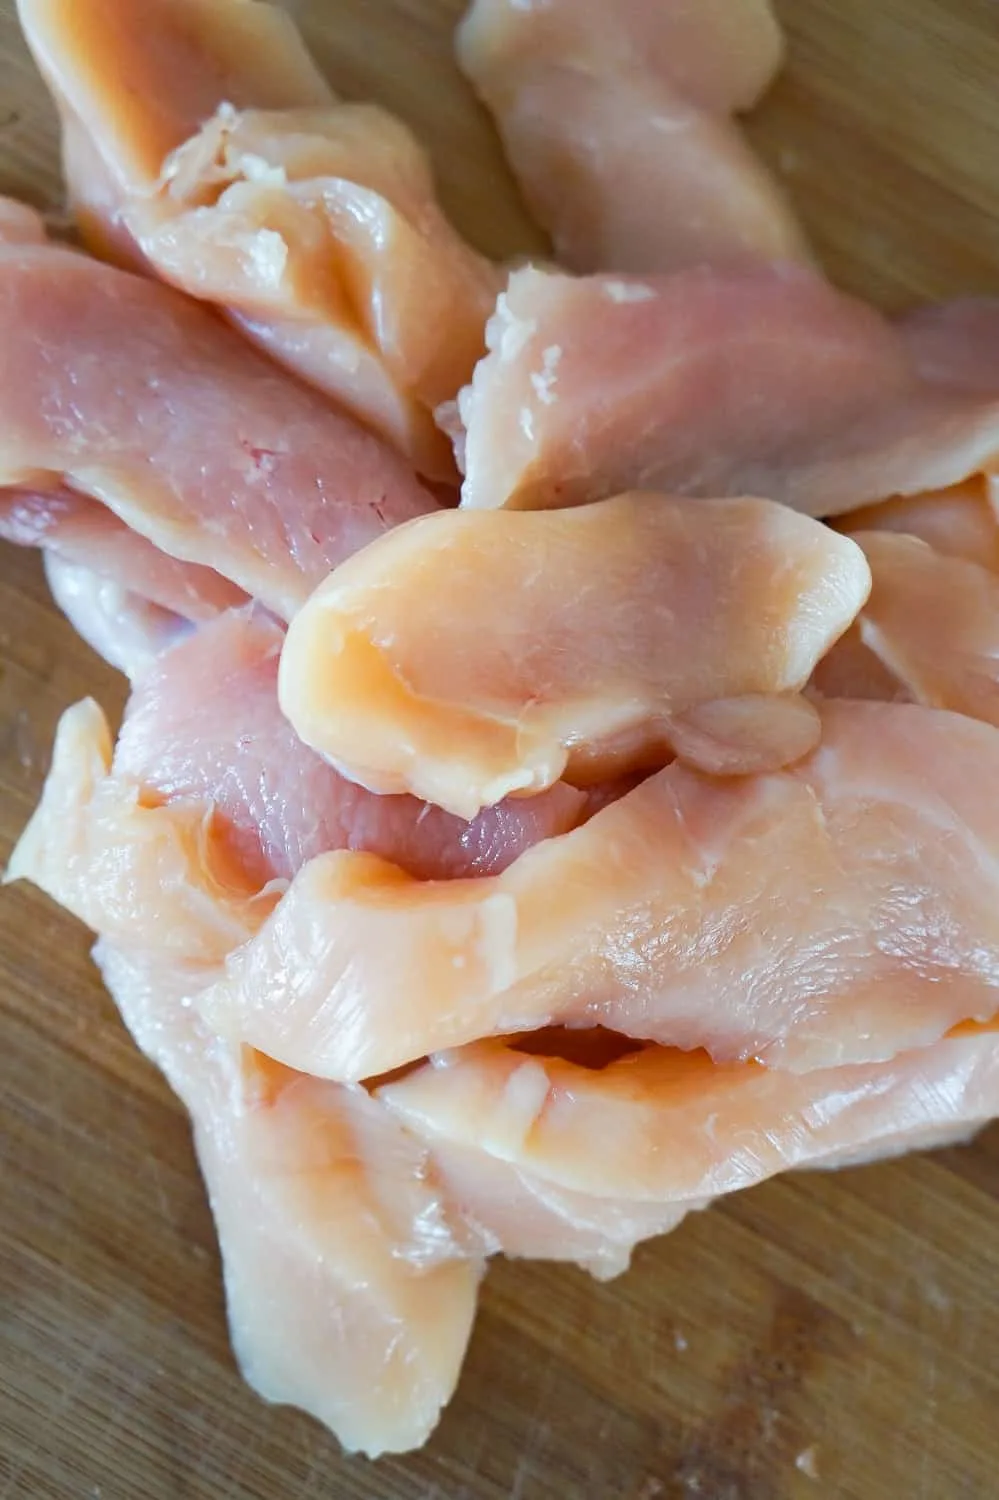 raw chicken breast slices on a cutting board